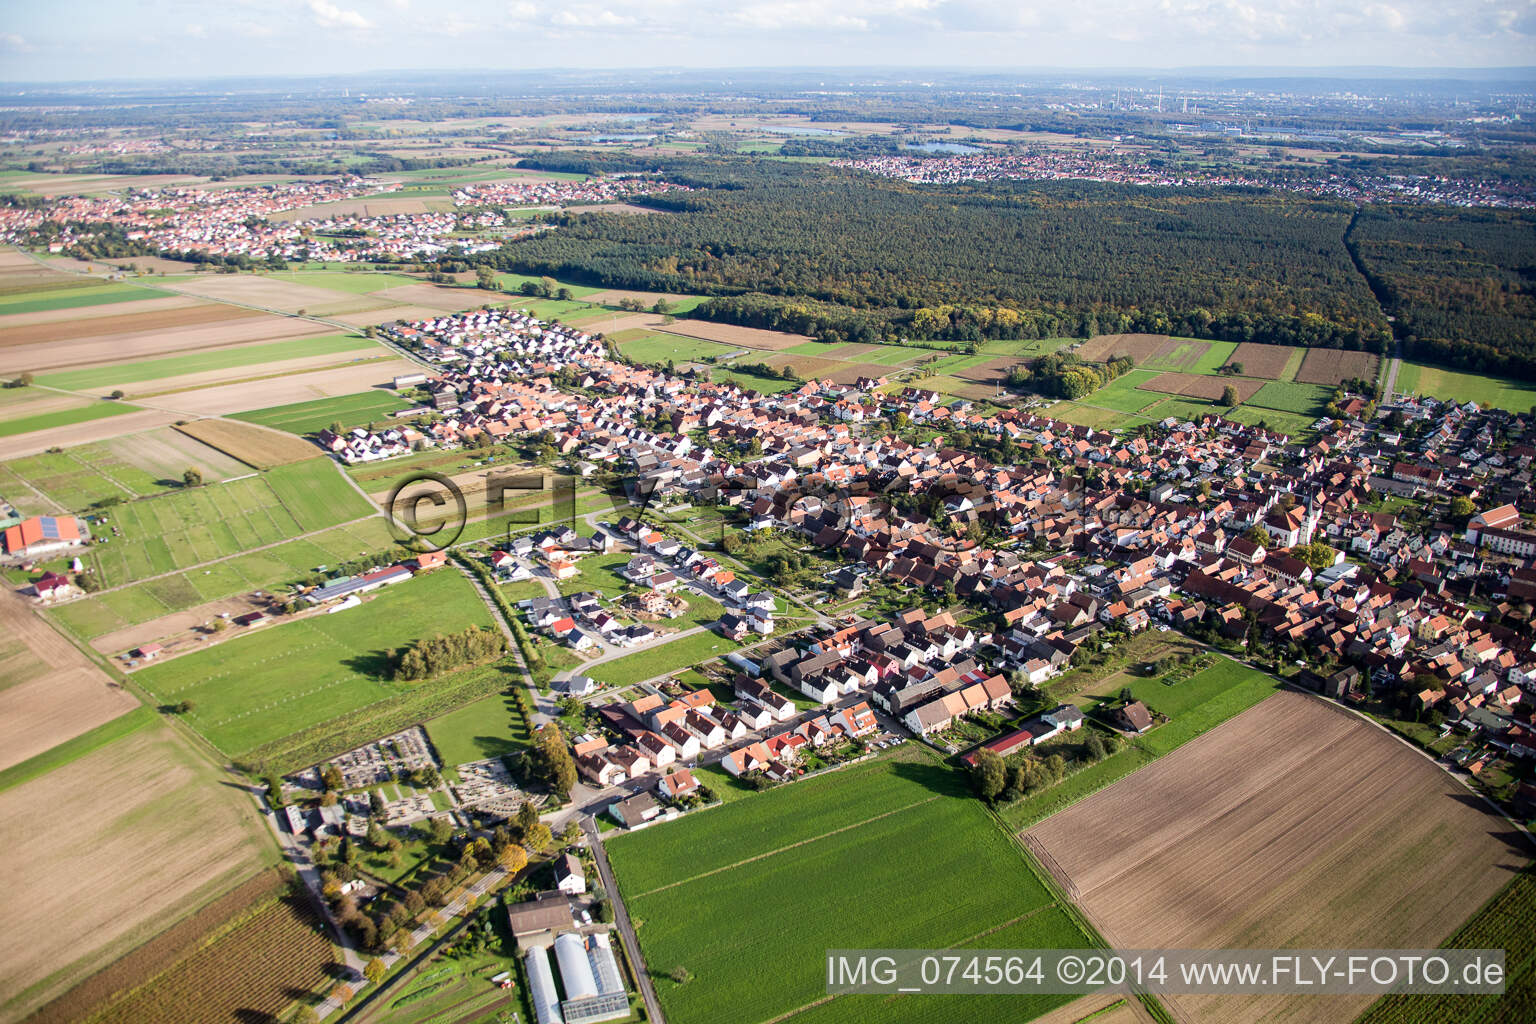 Hatzenbühl in the state Rhineland-Palatinate, Germany seen from above